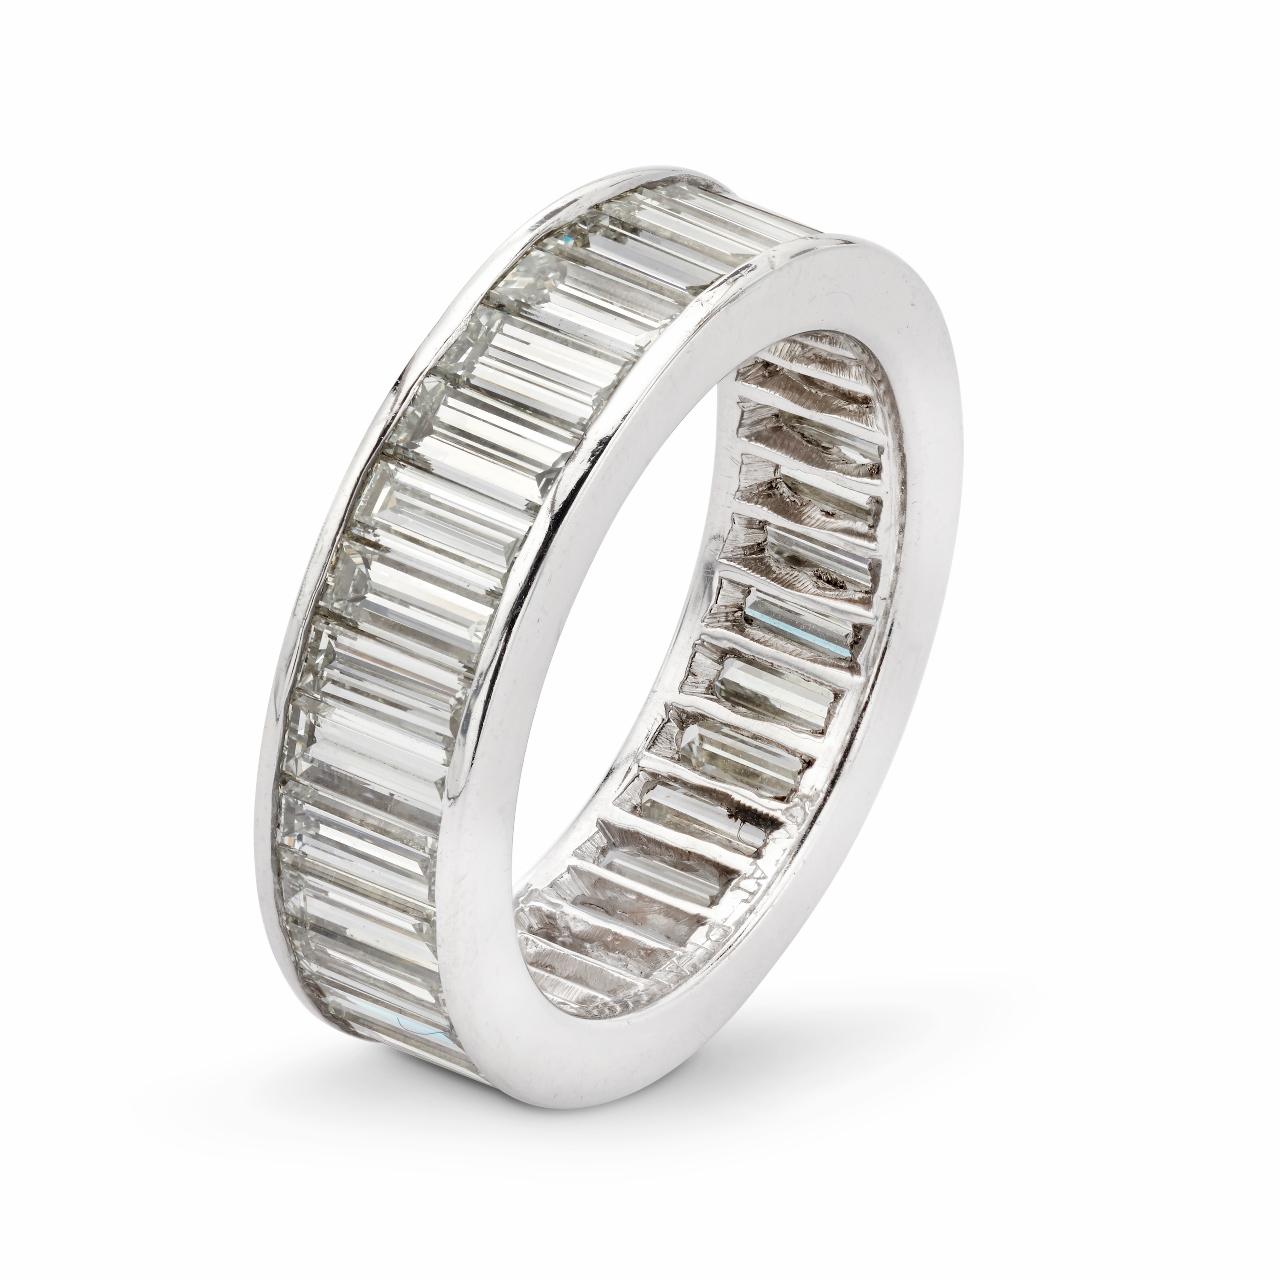 Designed by Kwiat, platinum eternity band composed of thirty two (32) channel set straight baguette cut diamonds totaling 4.80 carats, graded VS1 Clarity with I-J Color.  Comfortable on the finger, smooth and easy to wear alone or looks absolutely